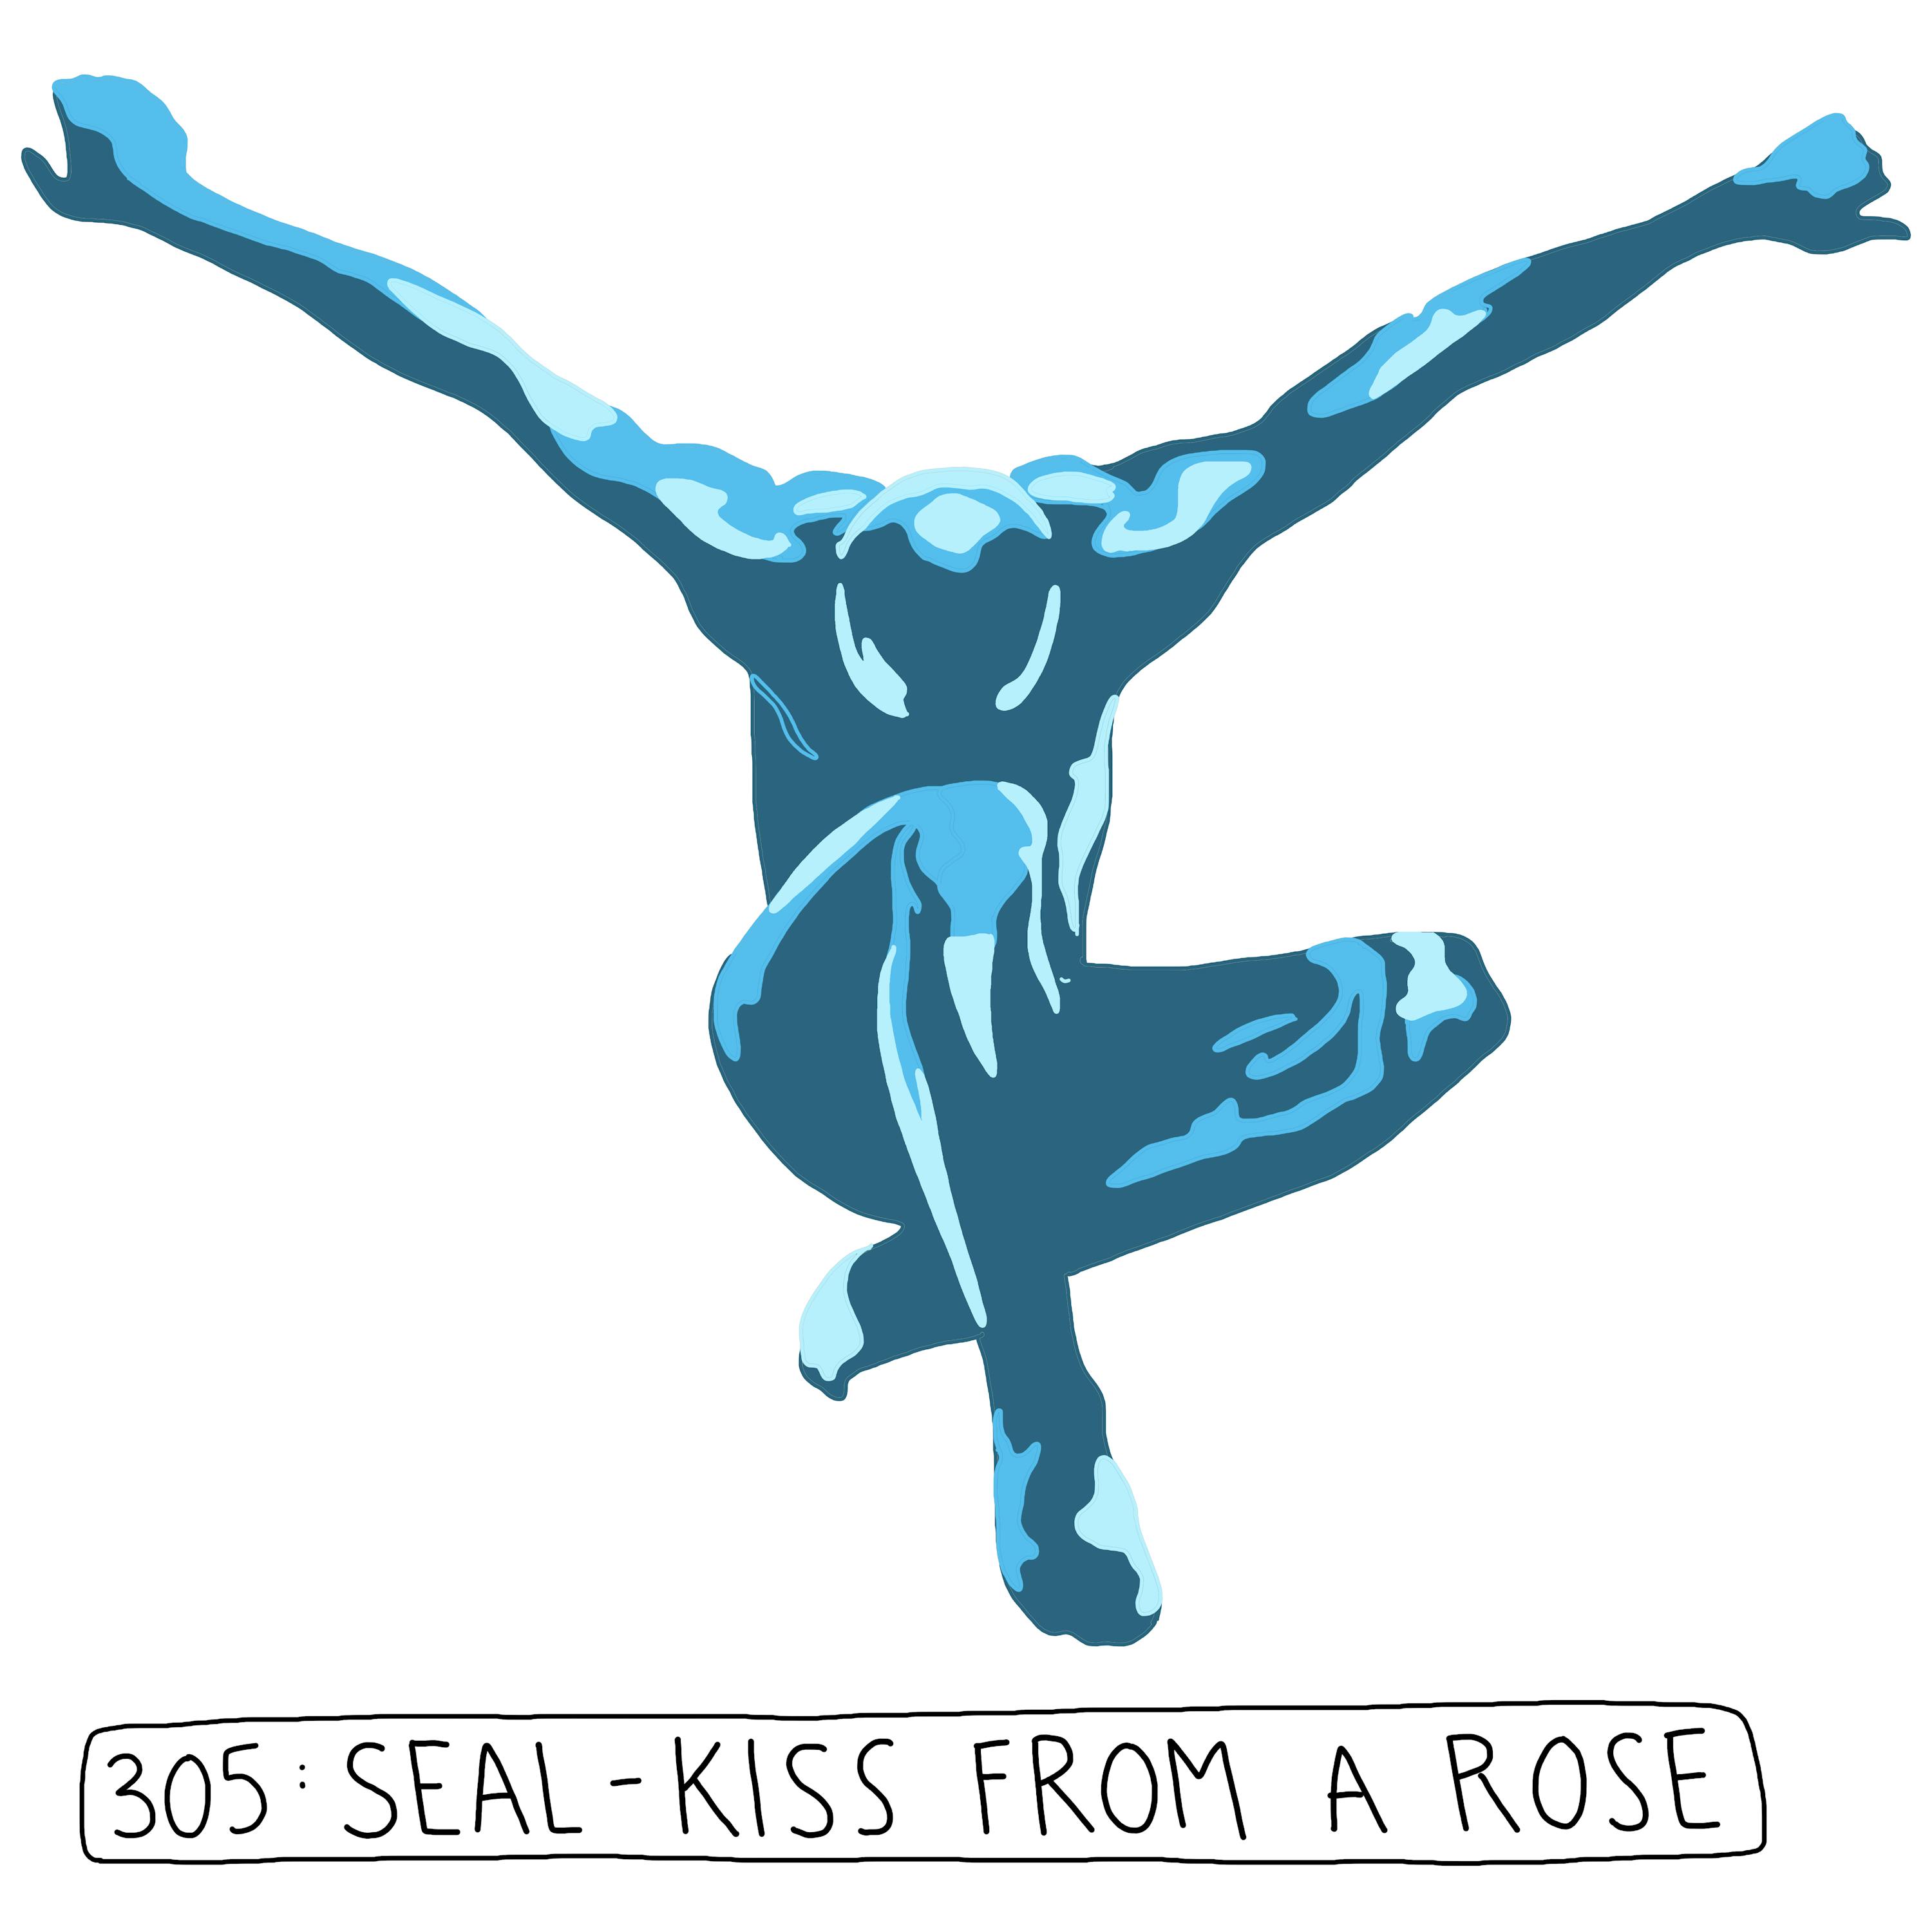 Modern Classics: Seal - Kiss From a Rose